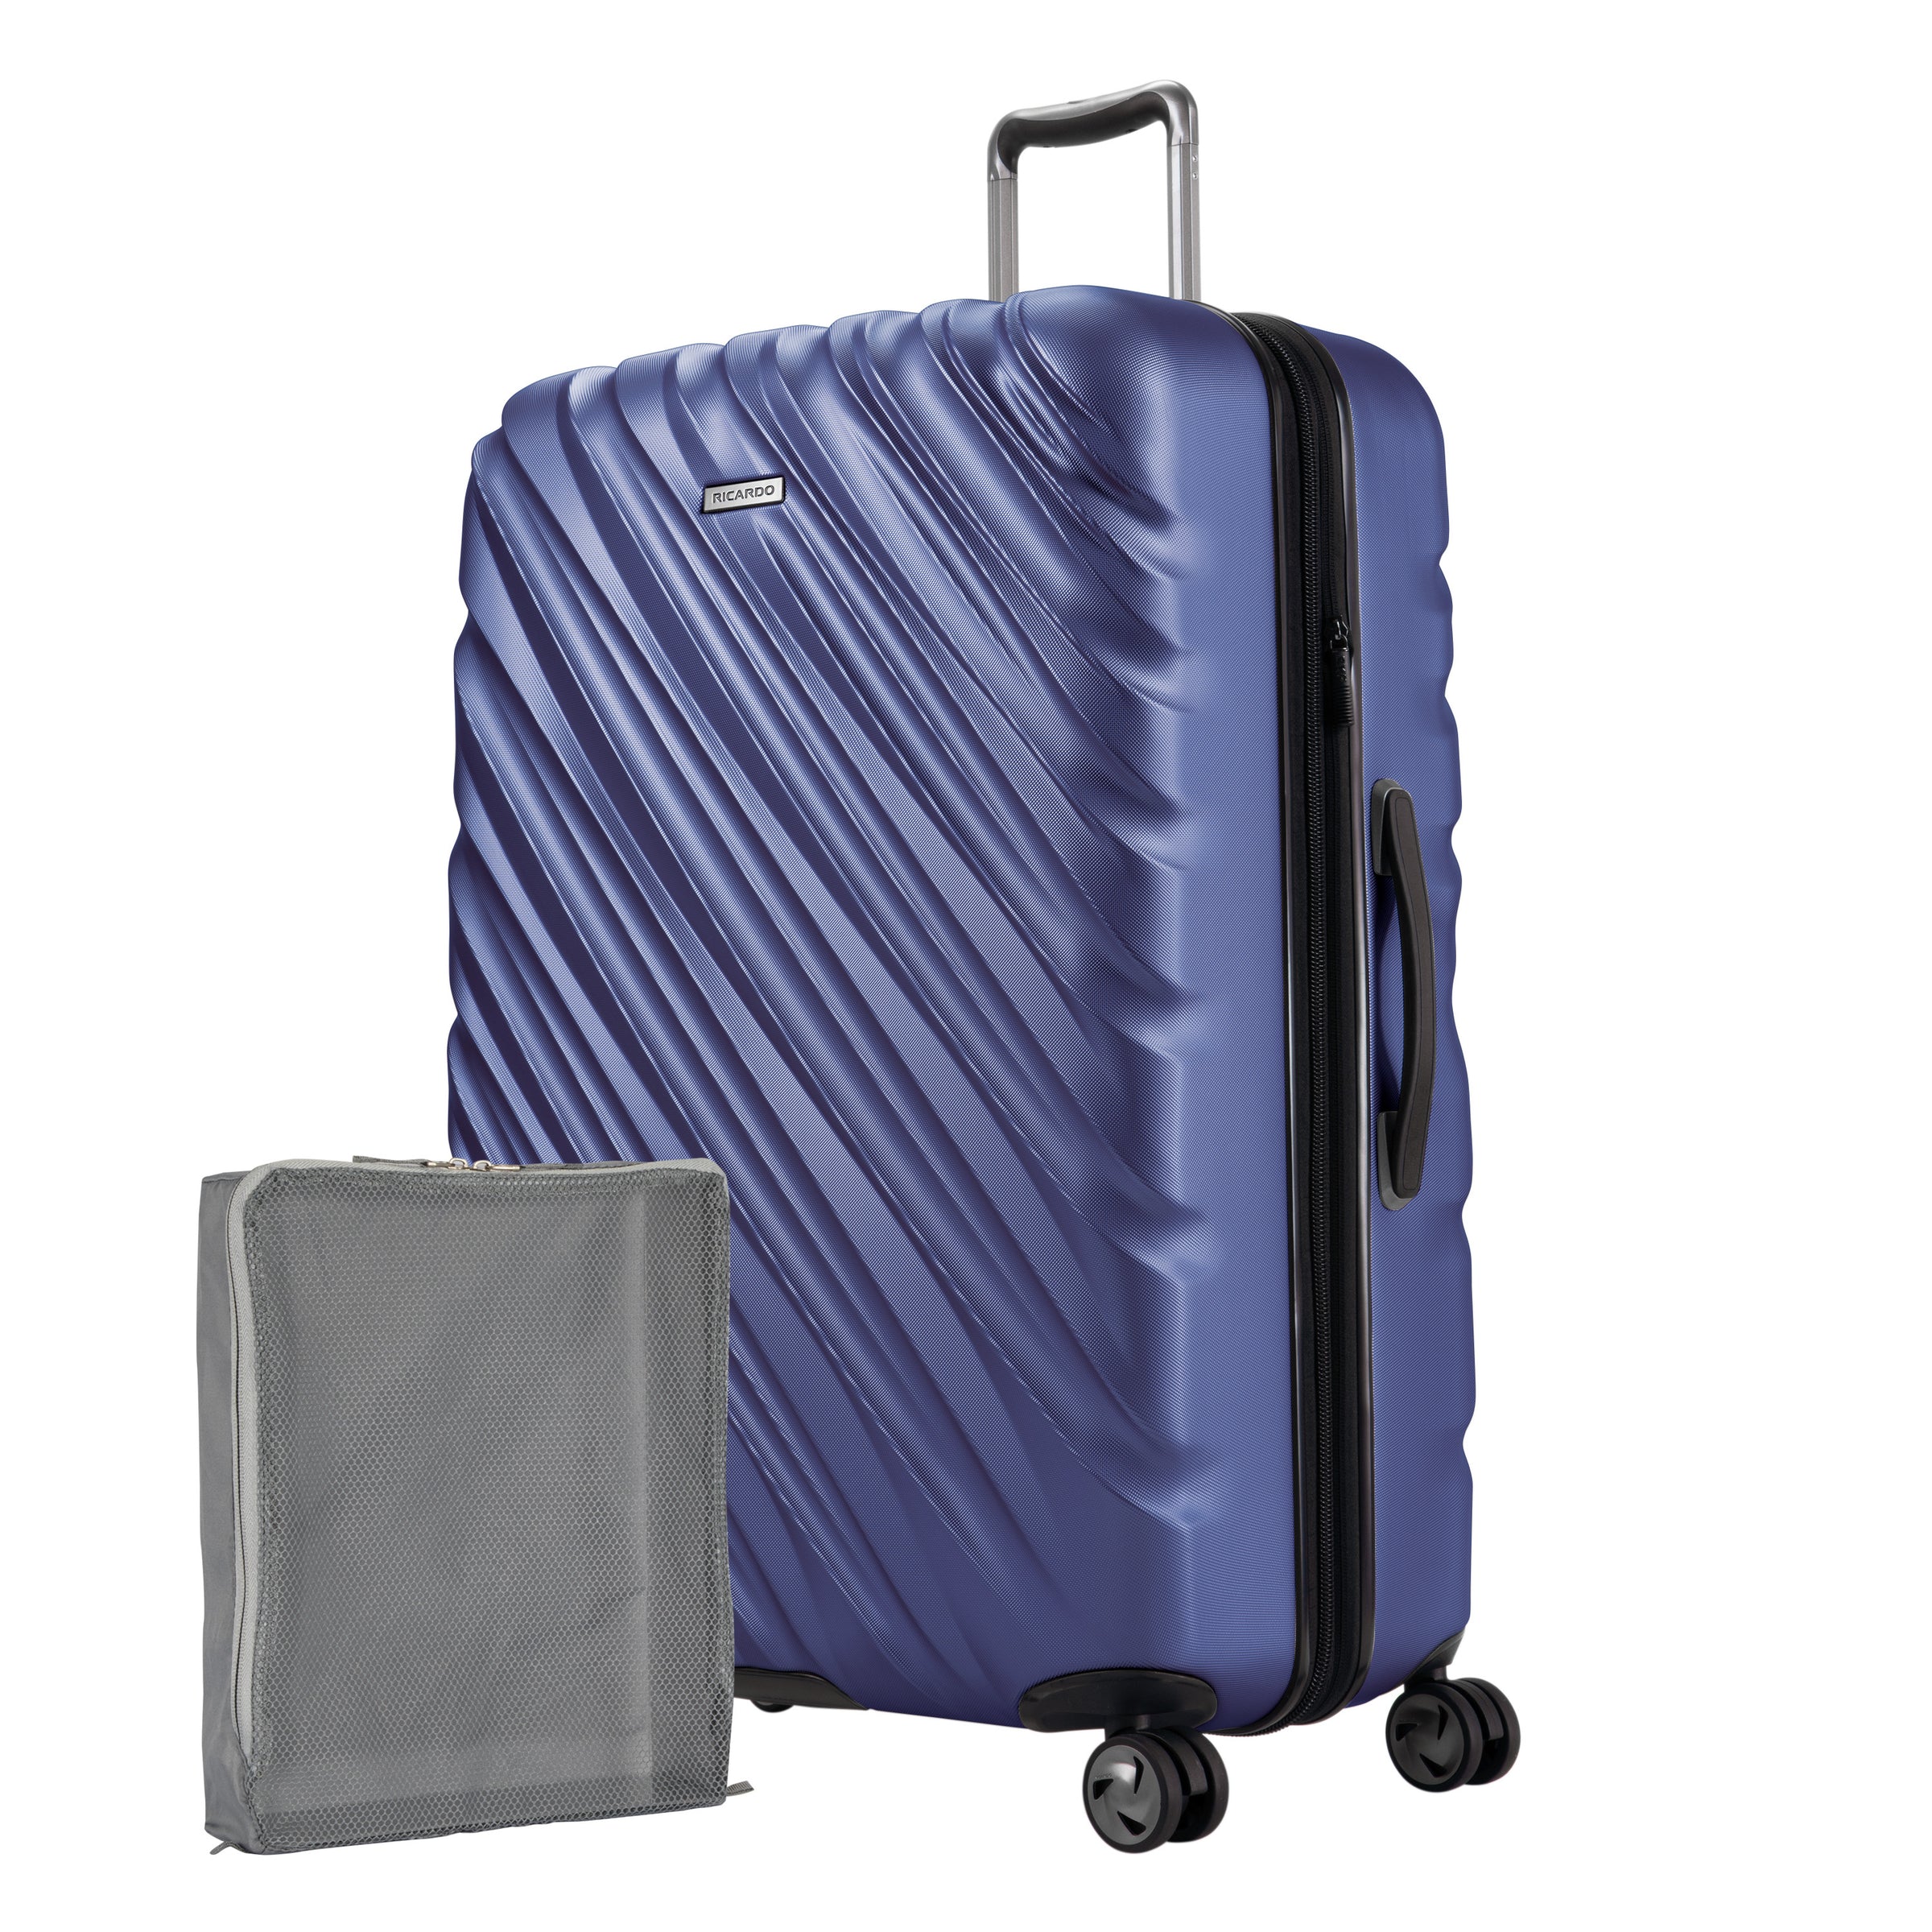 Maritime Blue Ricardo Mojave hardside suitcase with diagonal grooves shown with a large grey packing cube